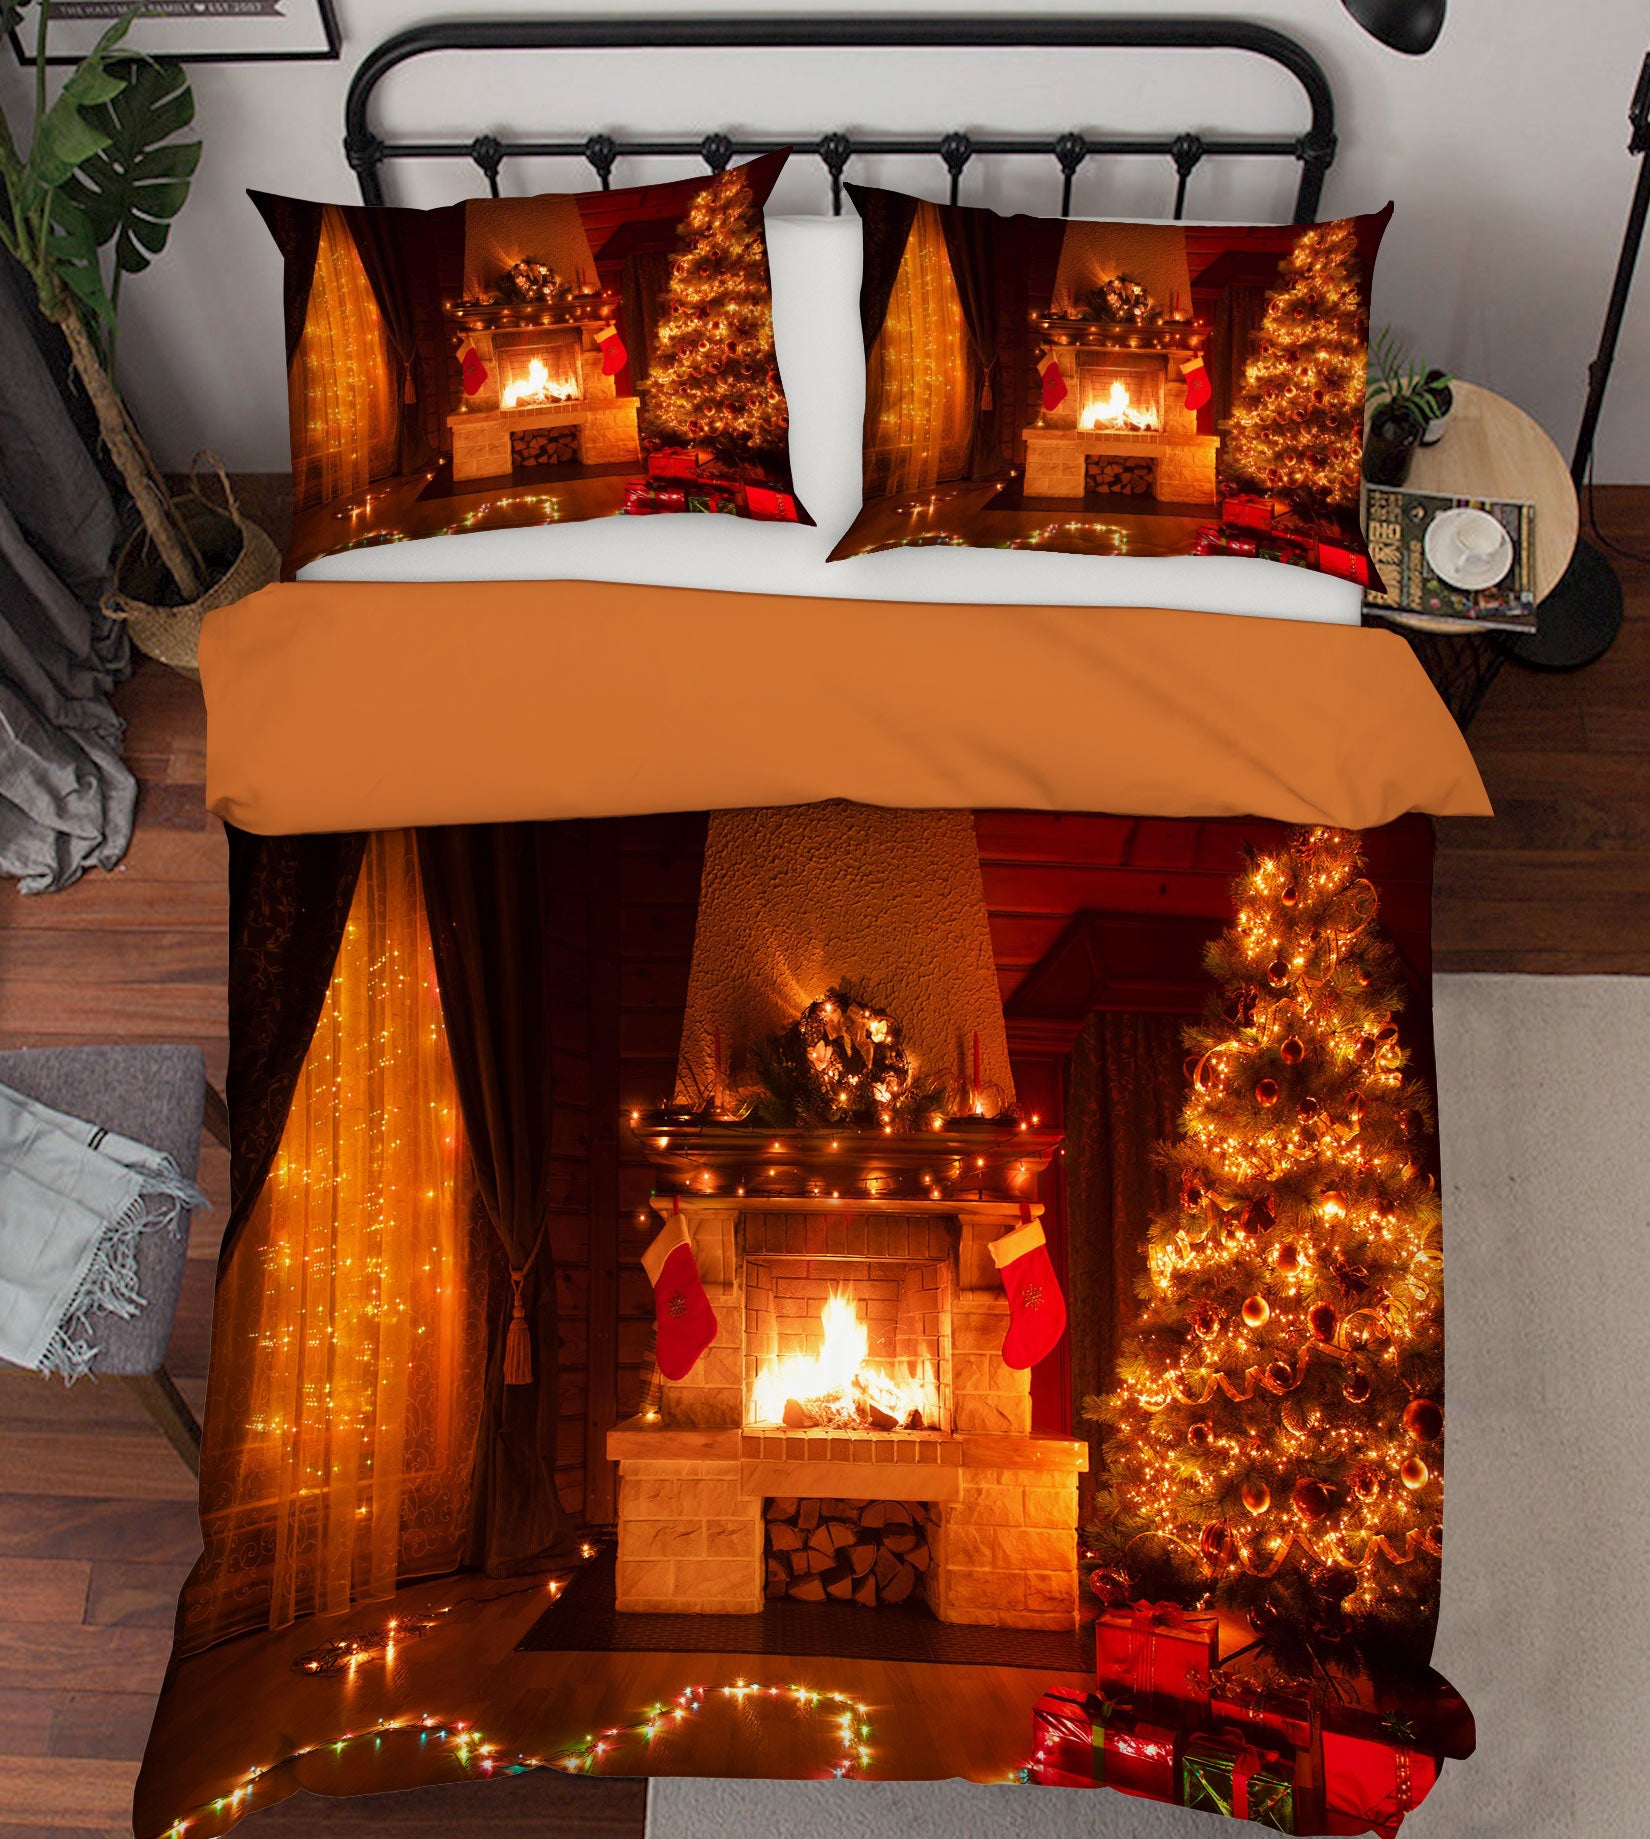 3D Fireplace 52190 Christmas Quilt Duvet Cover Xmas Bed Pillowcases